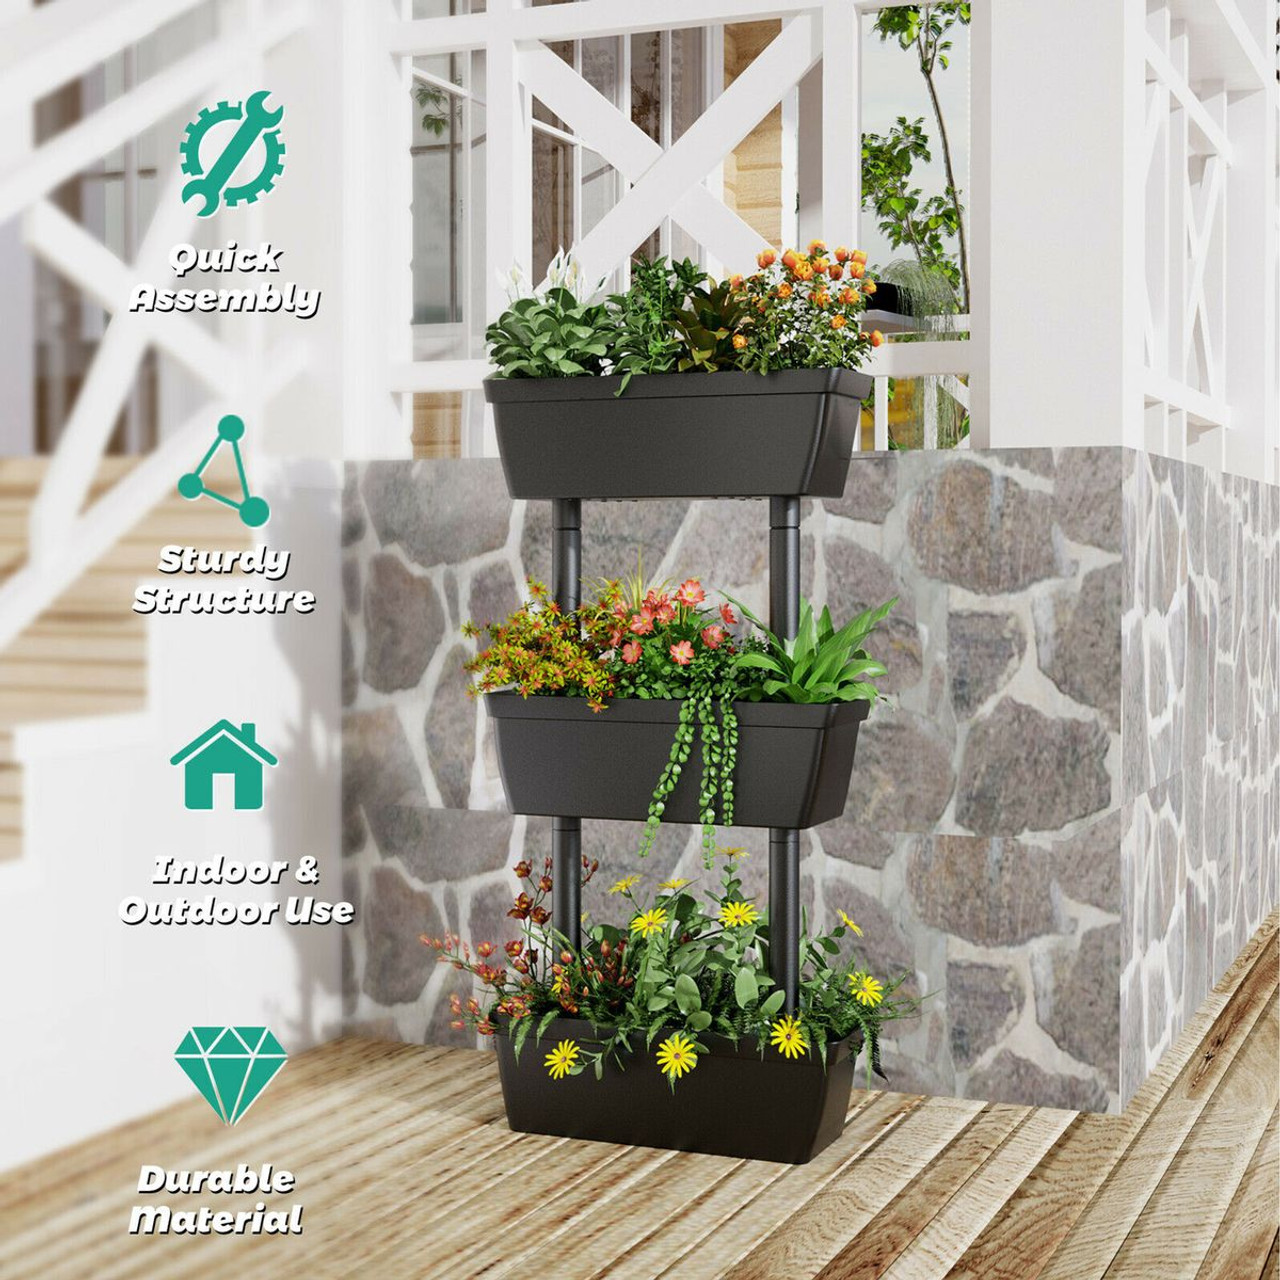 3-Tier Freestanding Vertical Plant Stand for Gardening & Planting Use product image